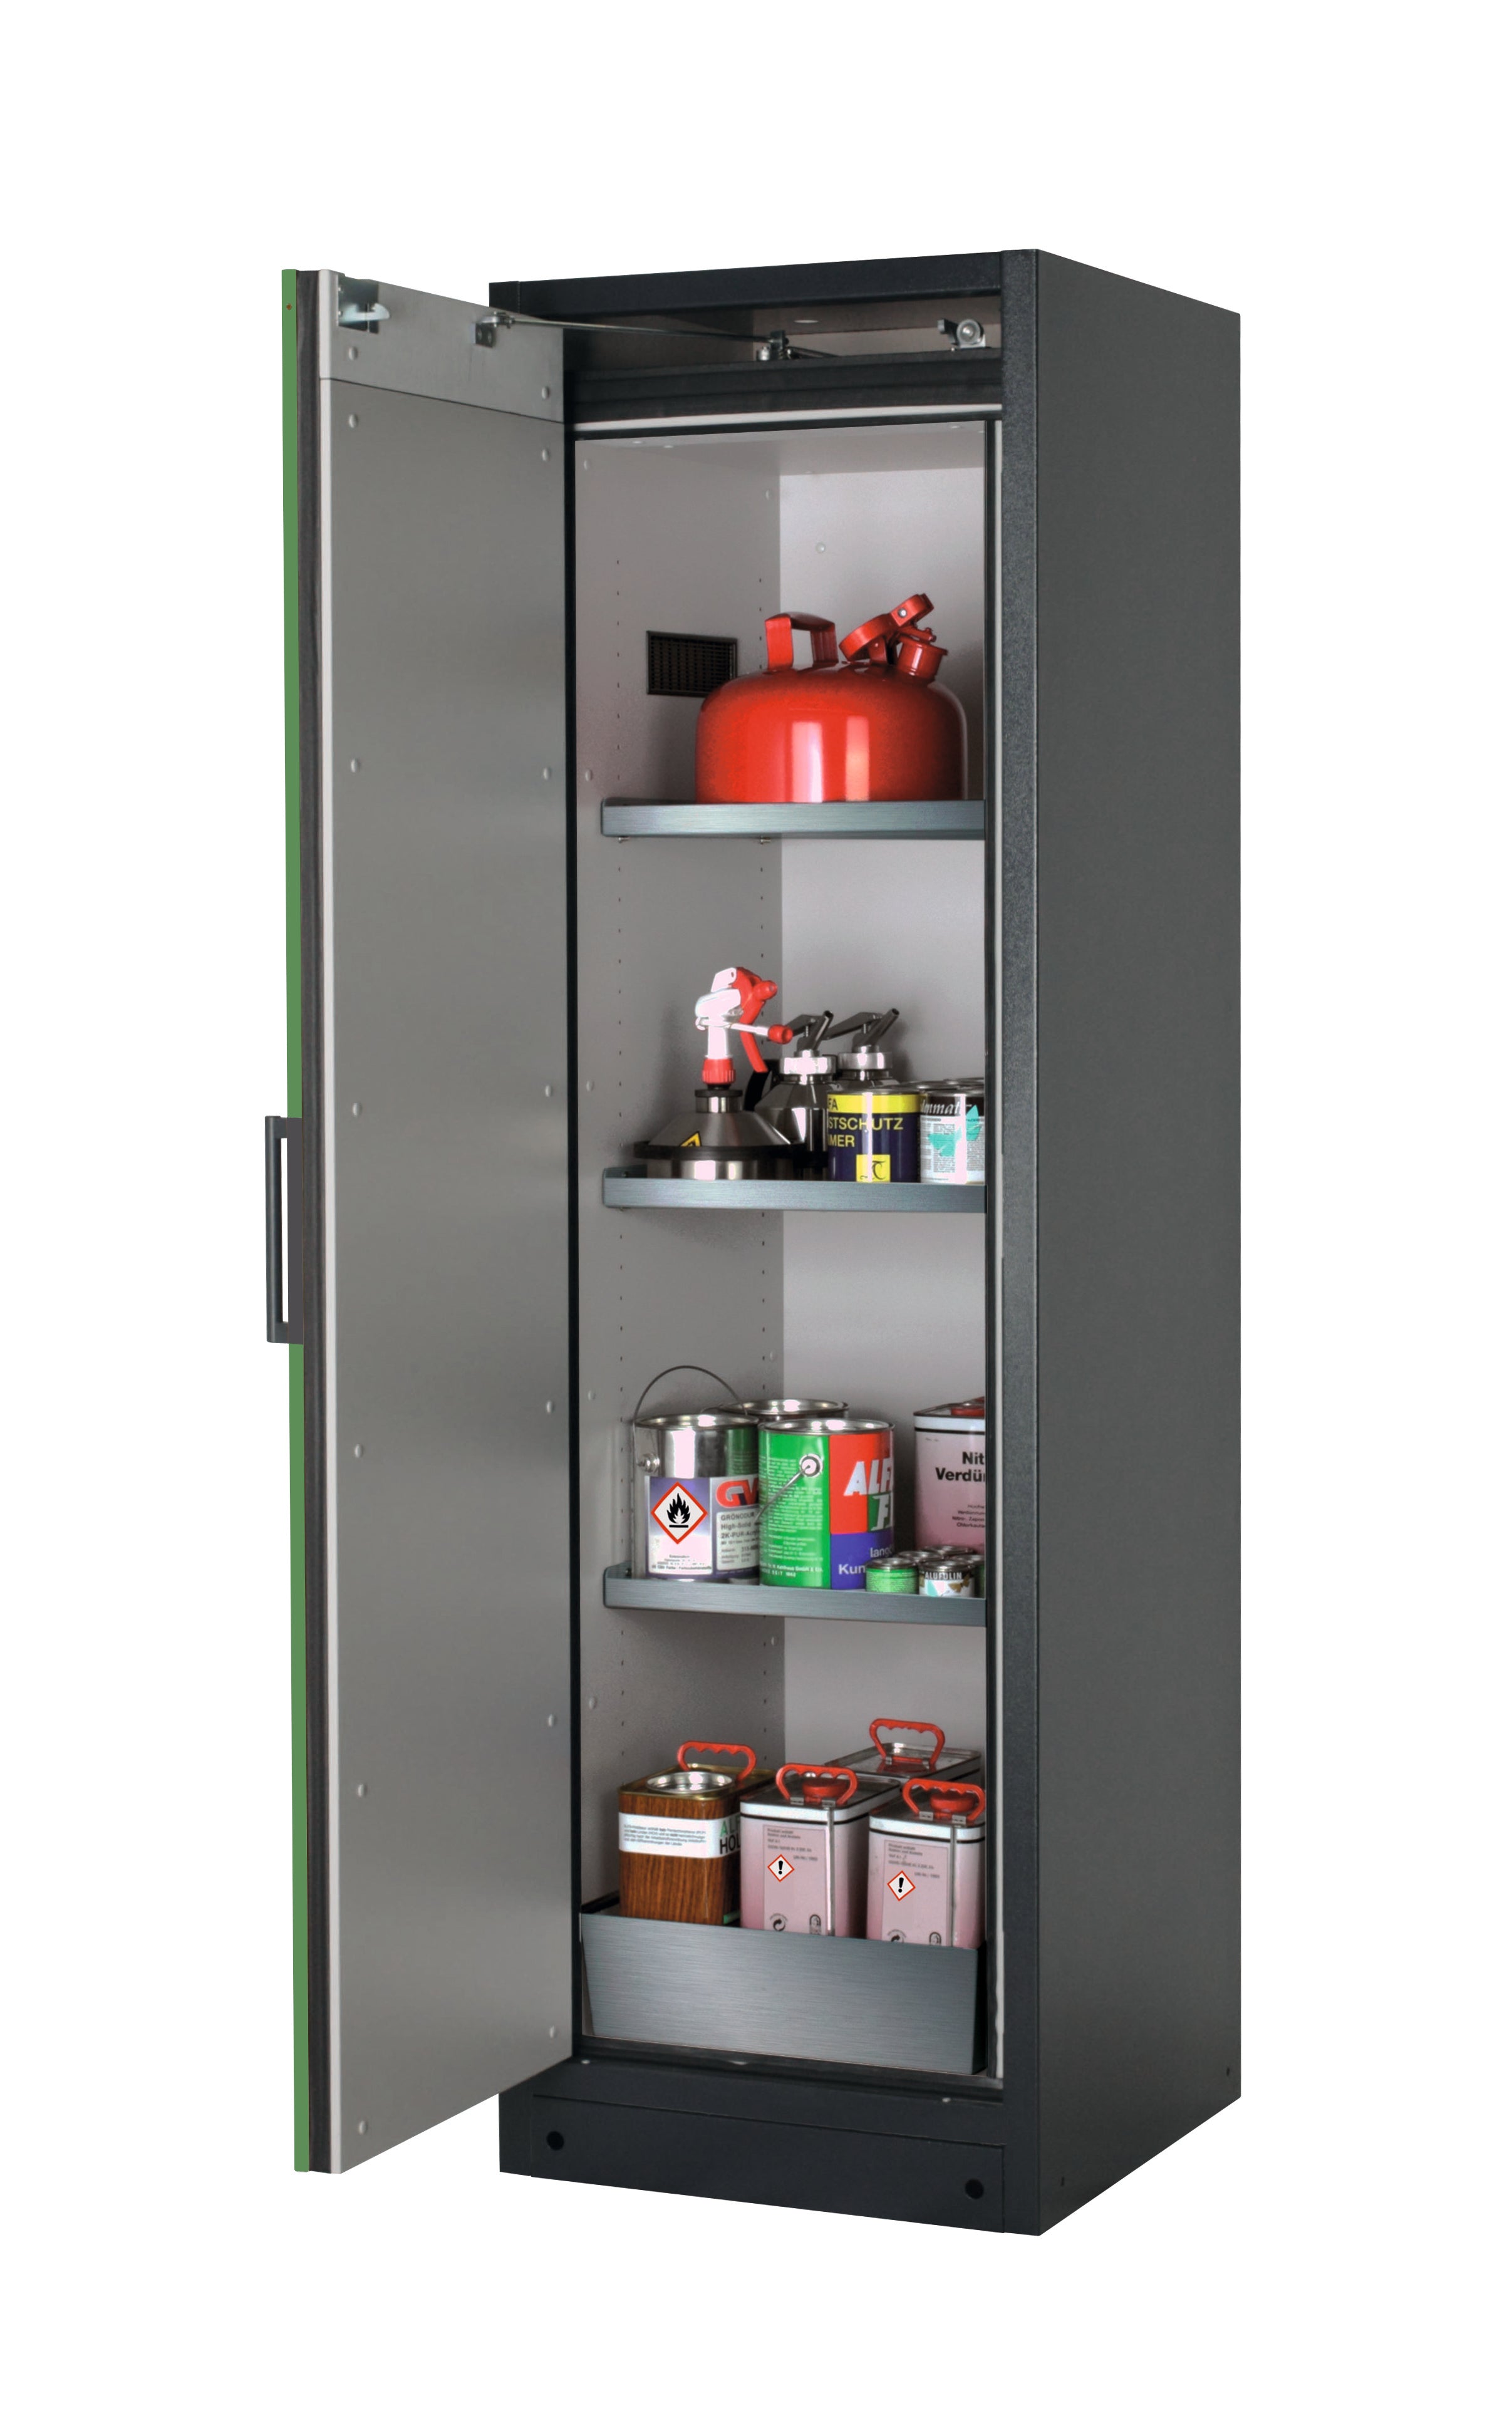 Type 90 safety storage cabinet Q-PEGASUS-90 model Q90.195.060.WDAC in reseda green RAL 6011 with 3x shelf standard (stainless steel 1.4301),